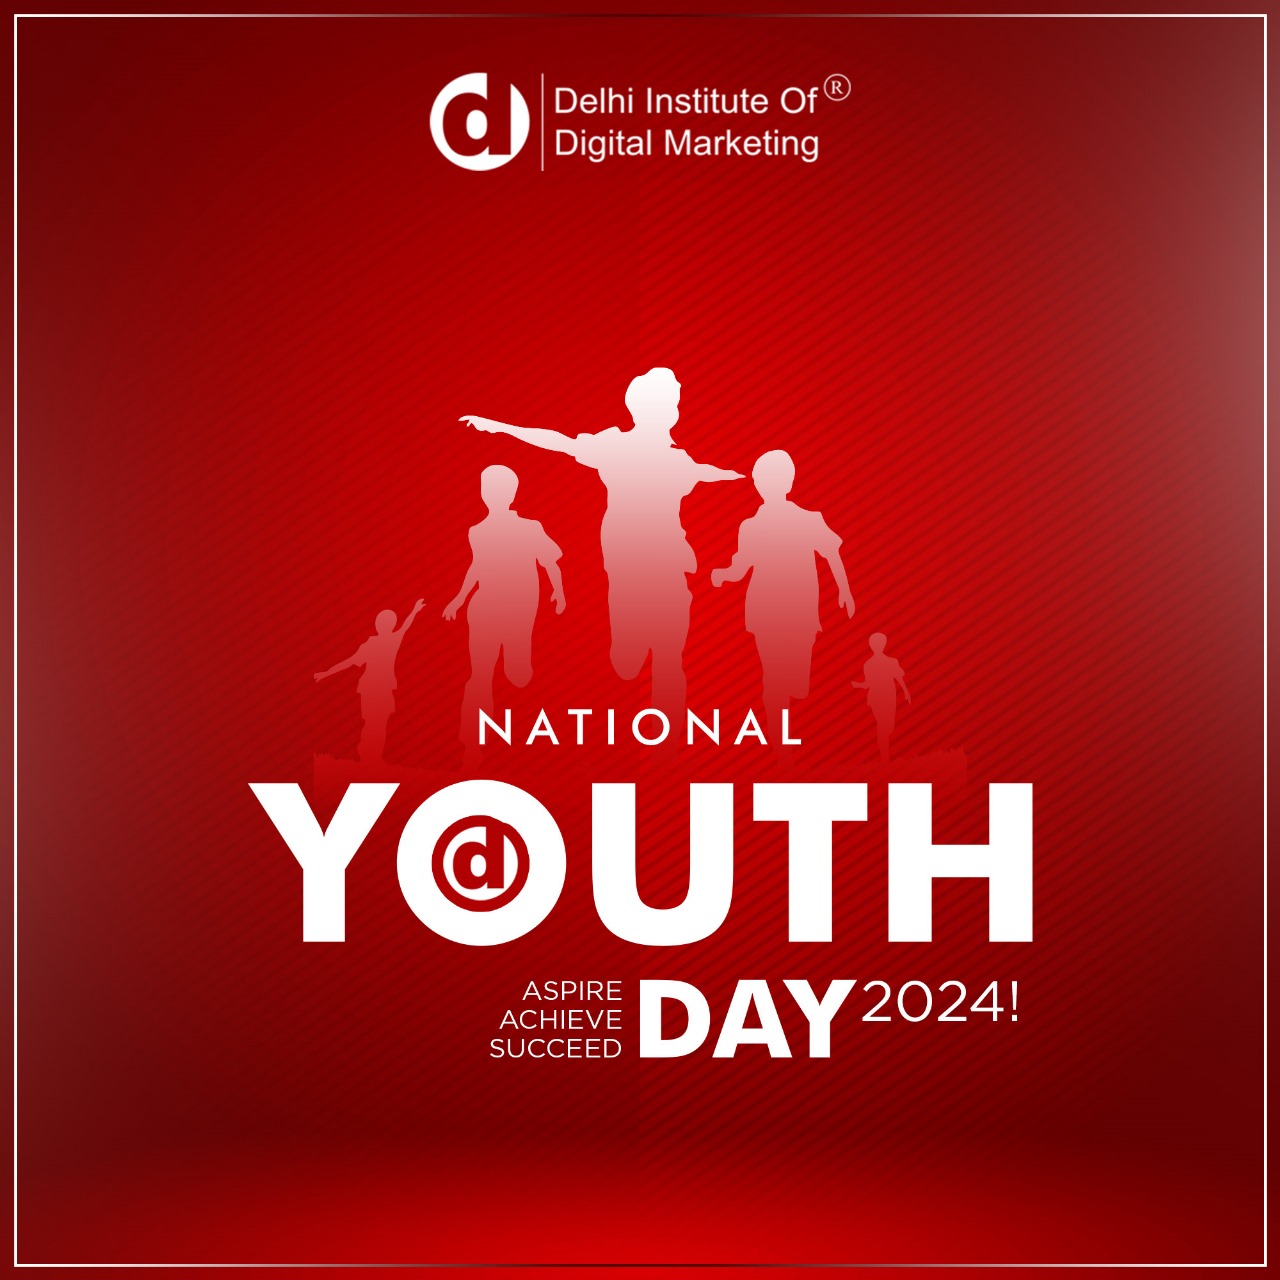 Bringing to Life the Spirit of National Youth Day